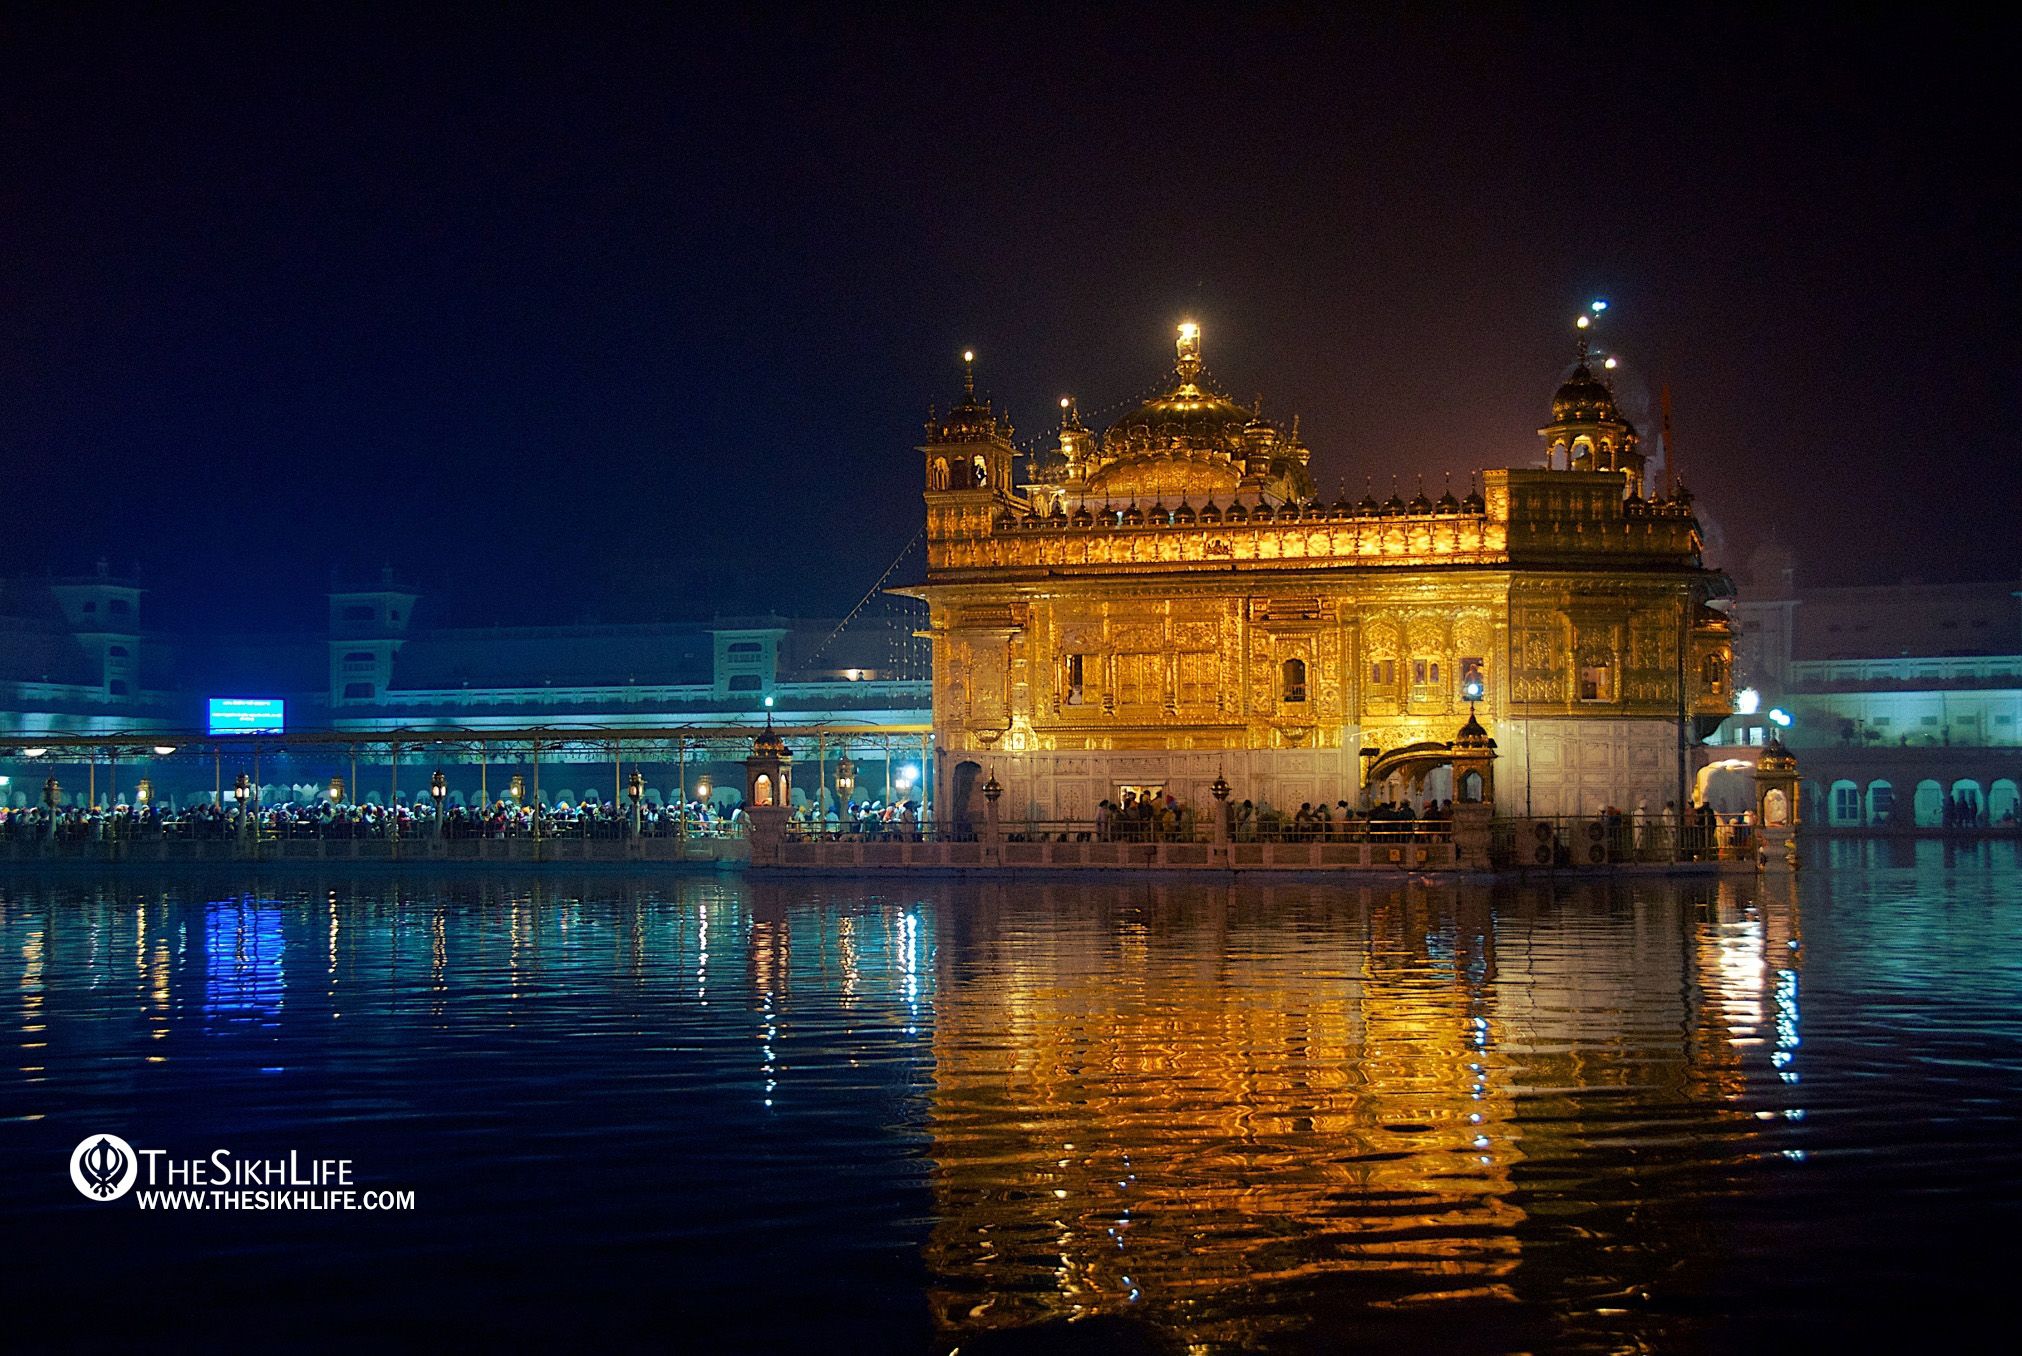 Sikh Wallpapers, Sikhism Wallpapers, Sikh photos